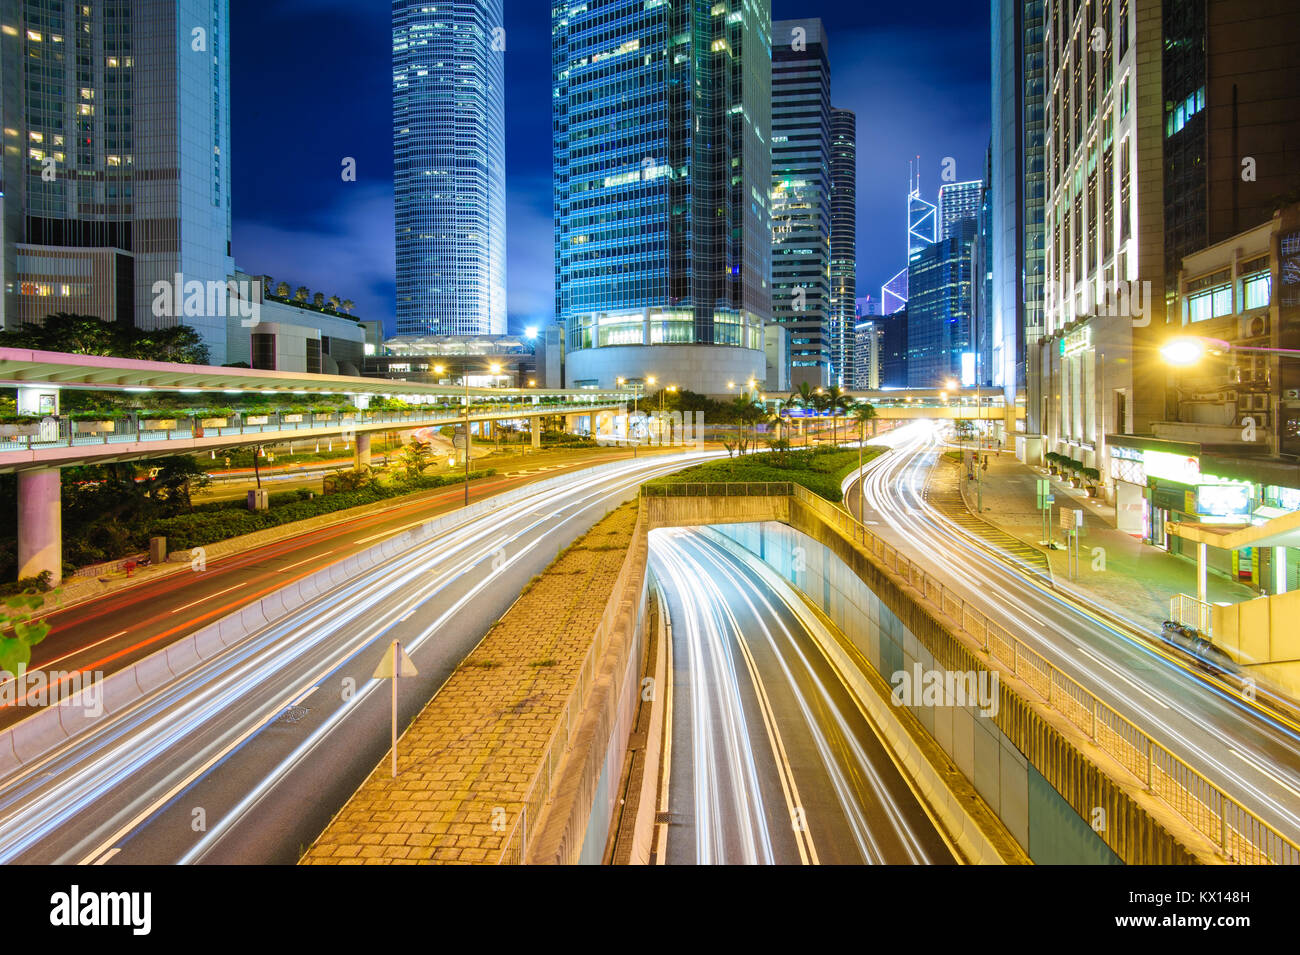 night view of Hong Kong with traffic trails Stock Photo